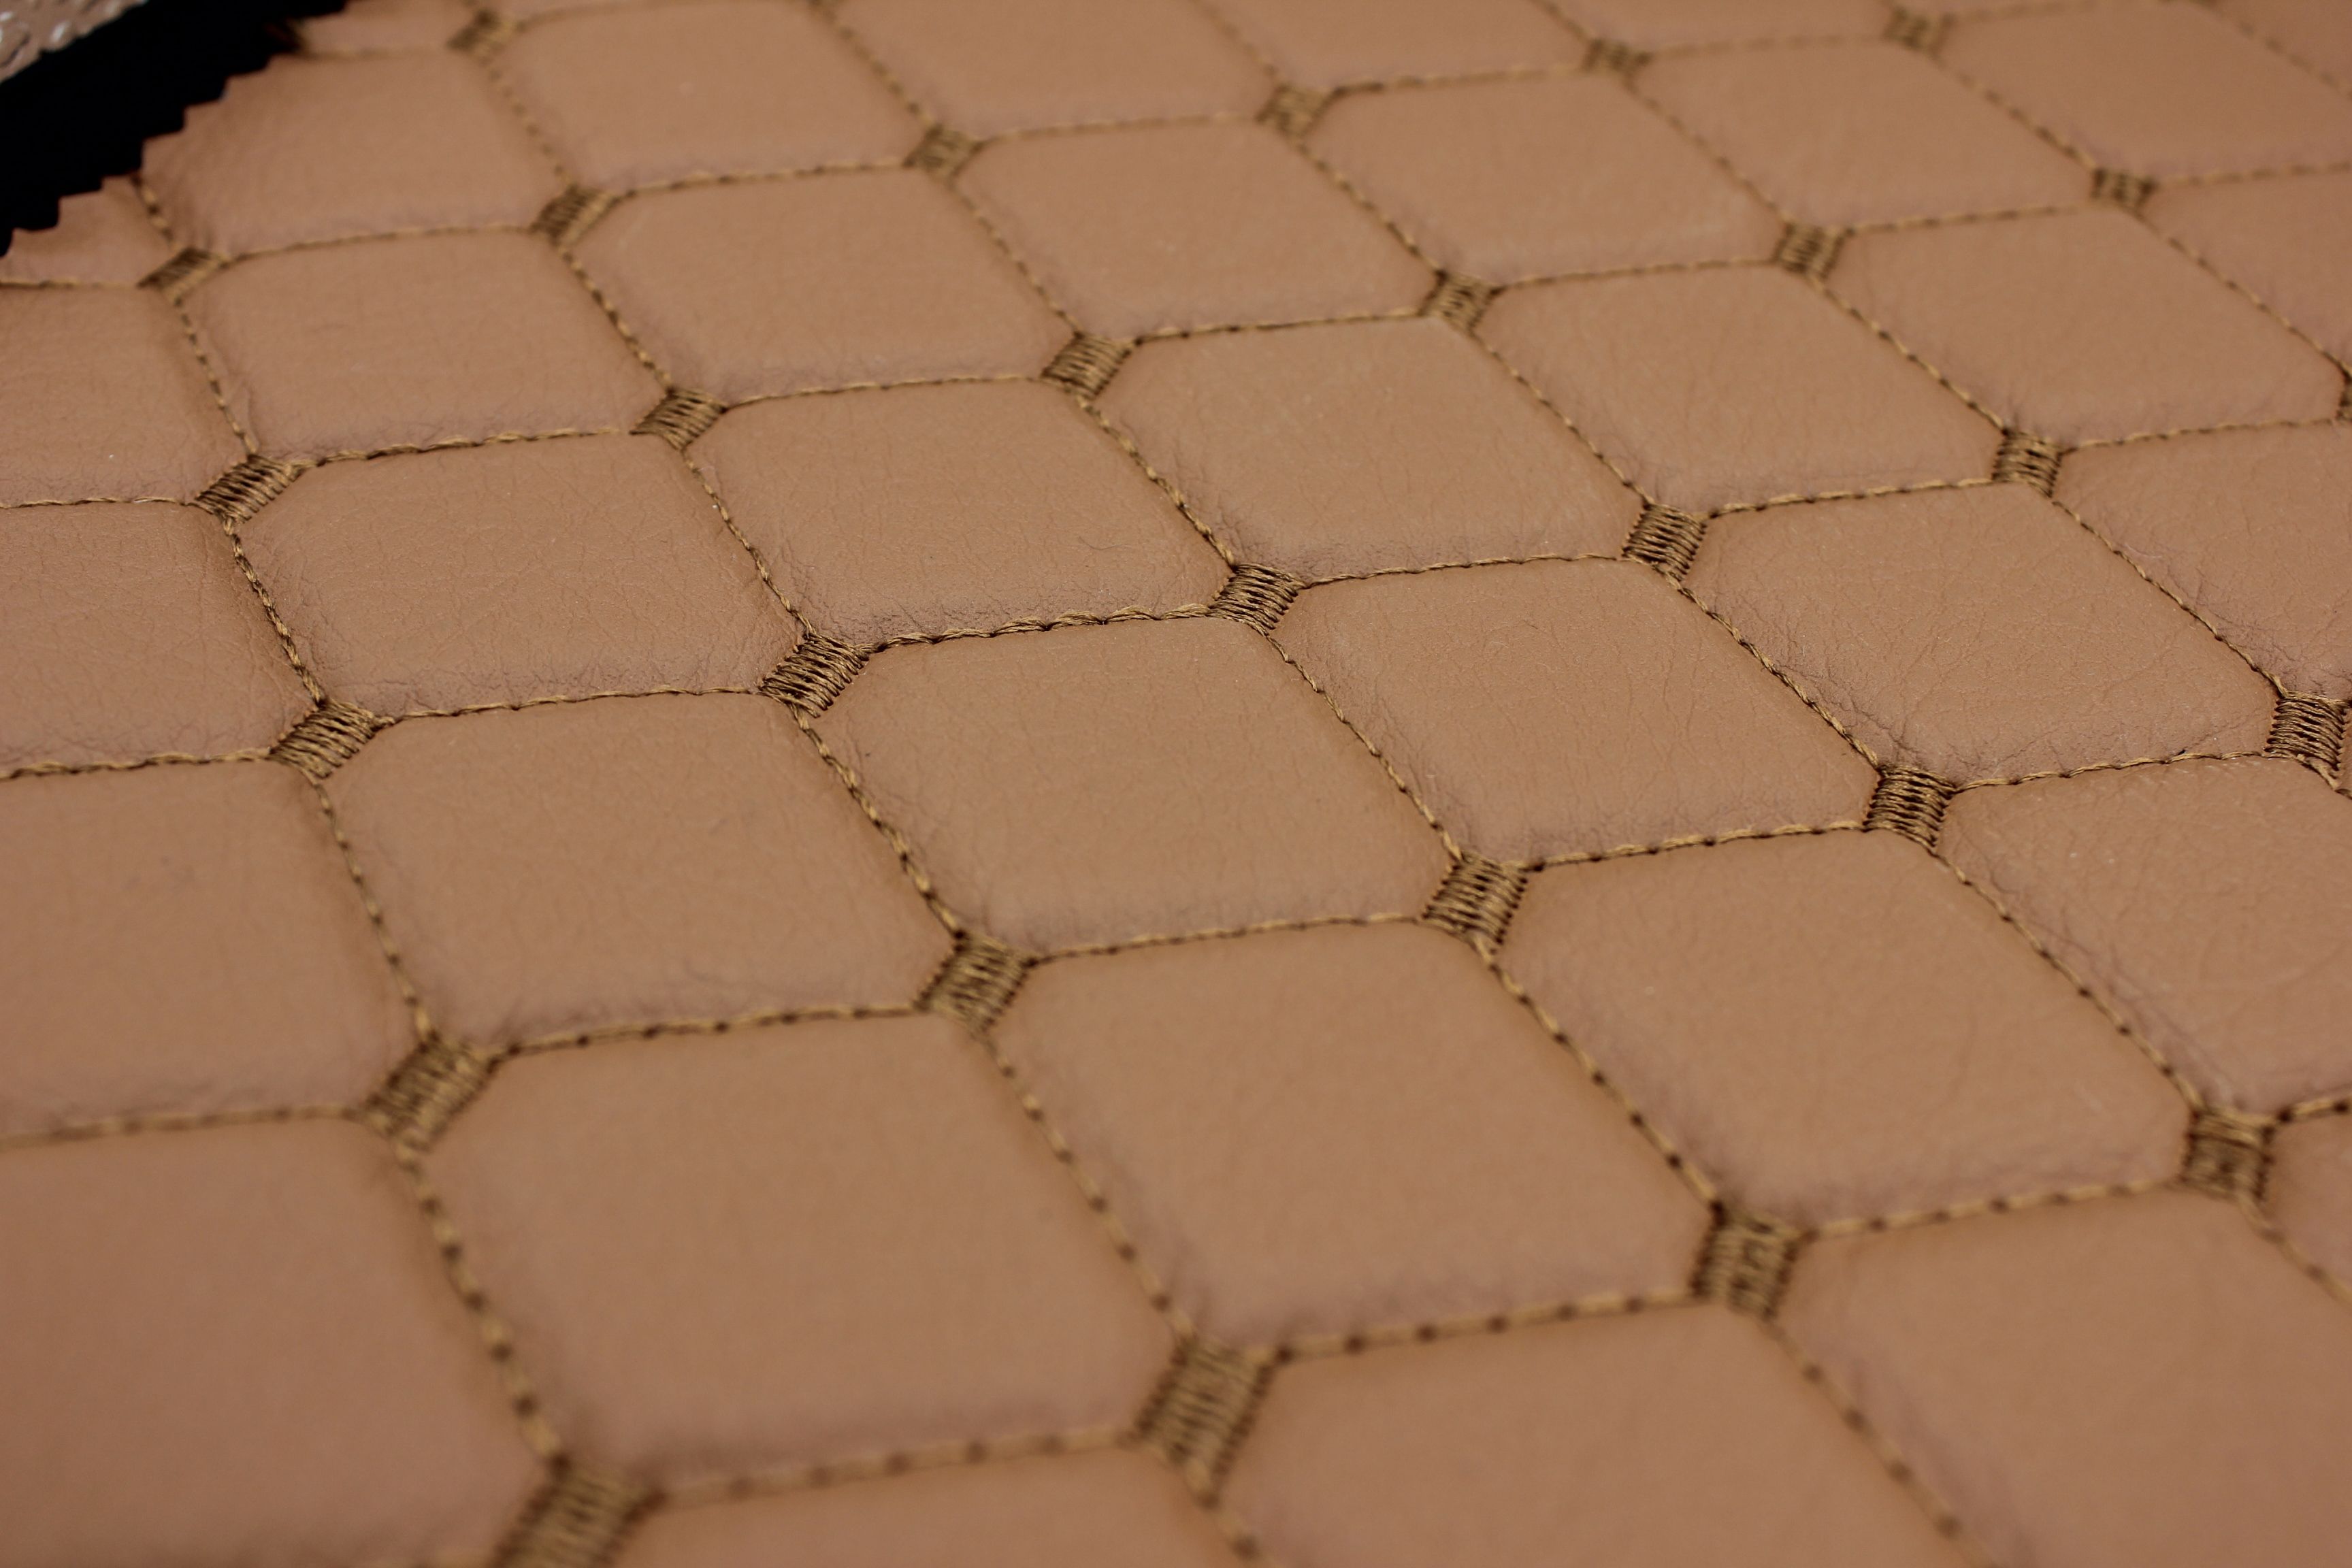 Tan Quilted Tan Vinyl Faux Leather Car Upholstery Fabric | 2"x2" 5x5cm Diamond Stitch with 5mm Foam | 140cm Wide | Automotive Projects